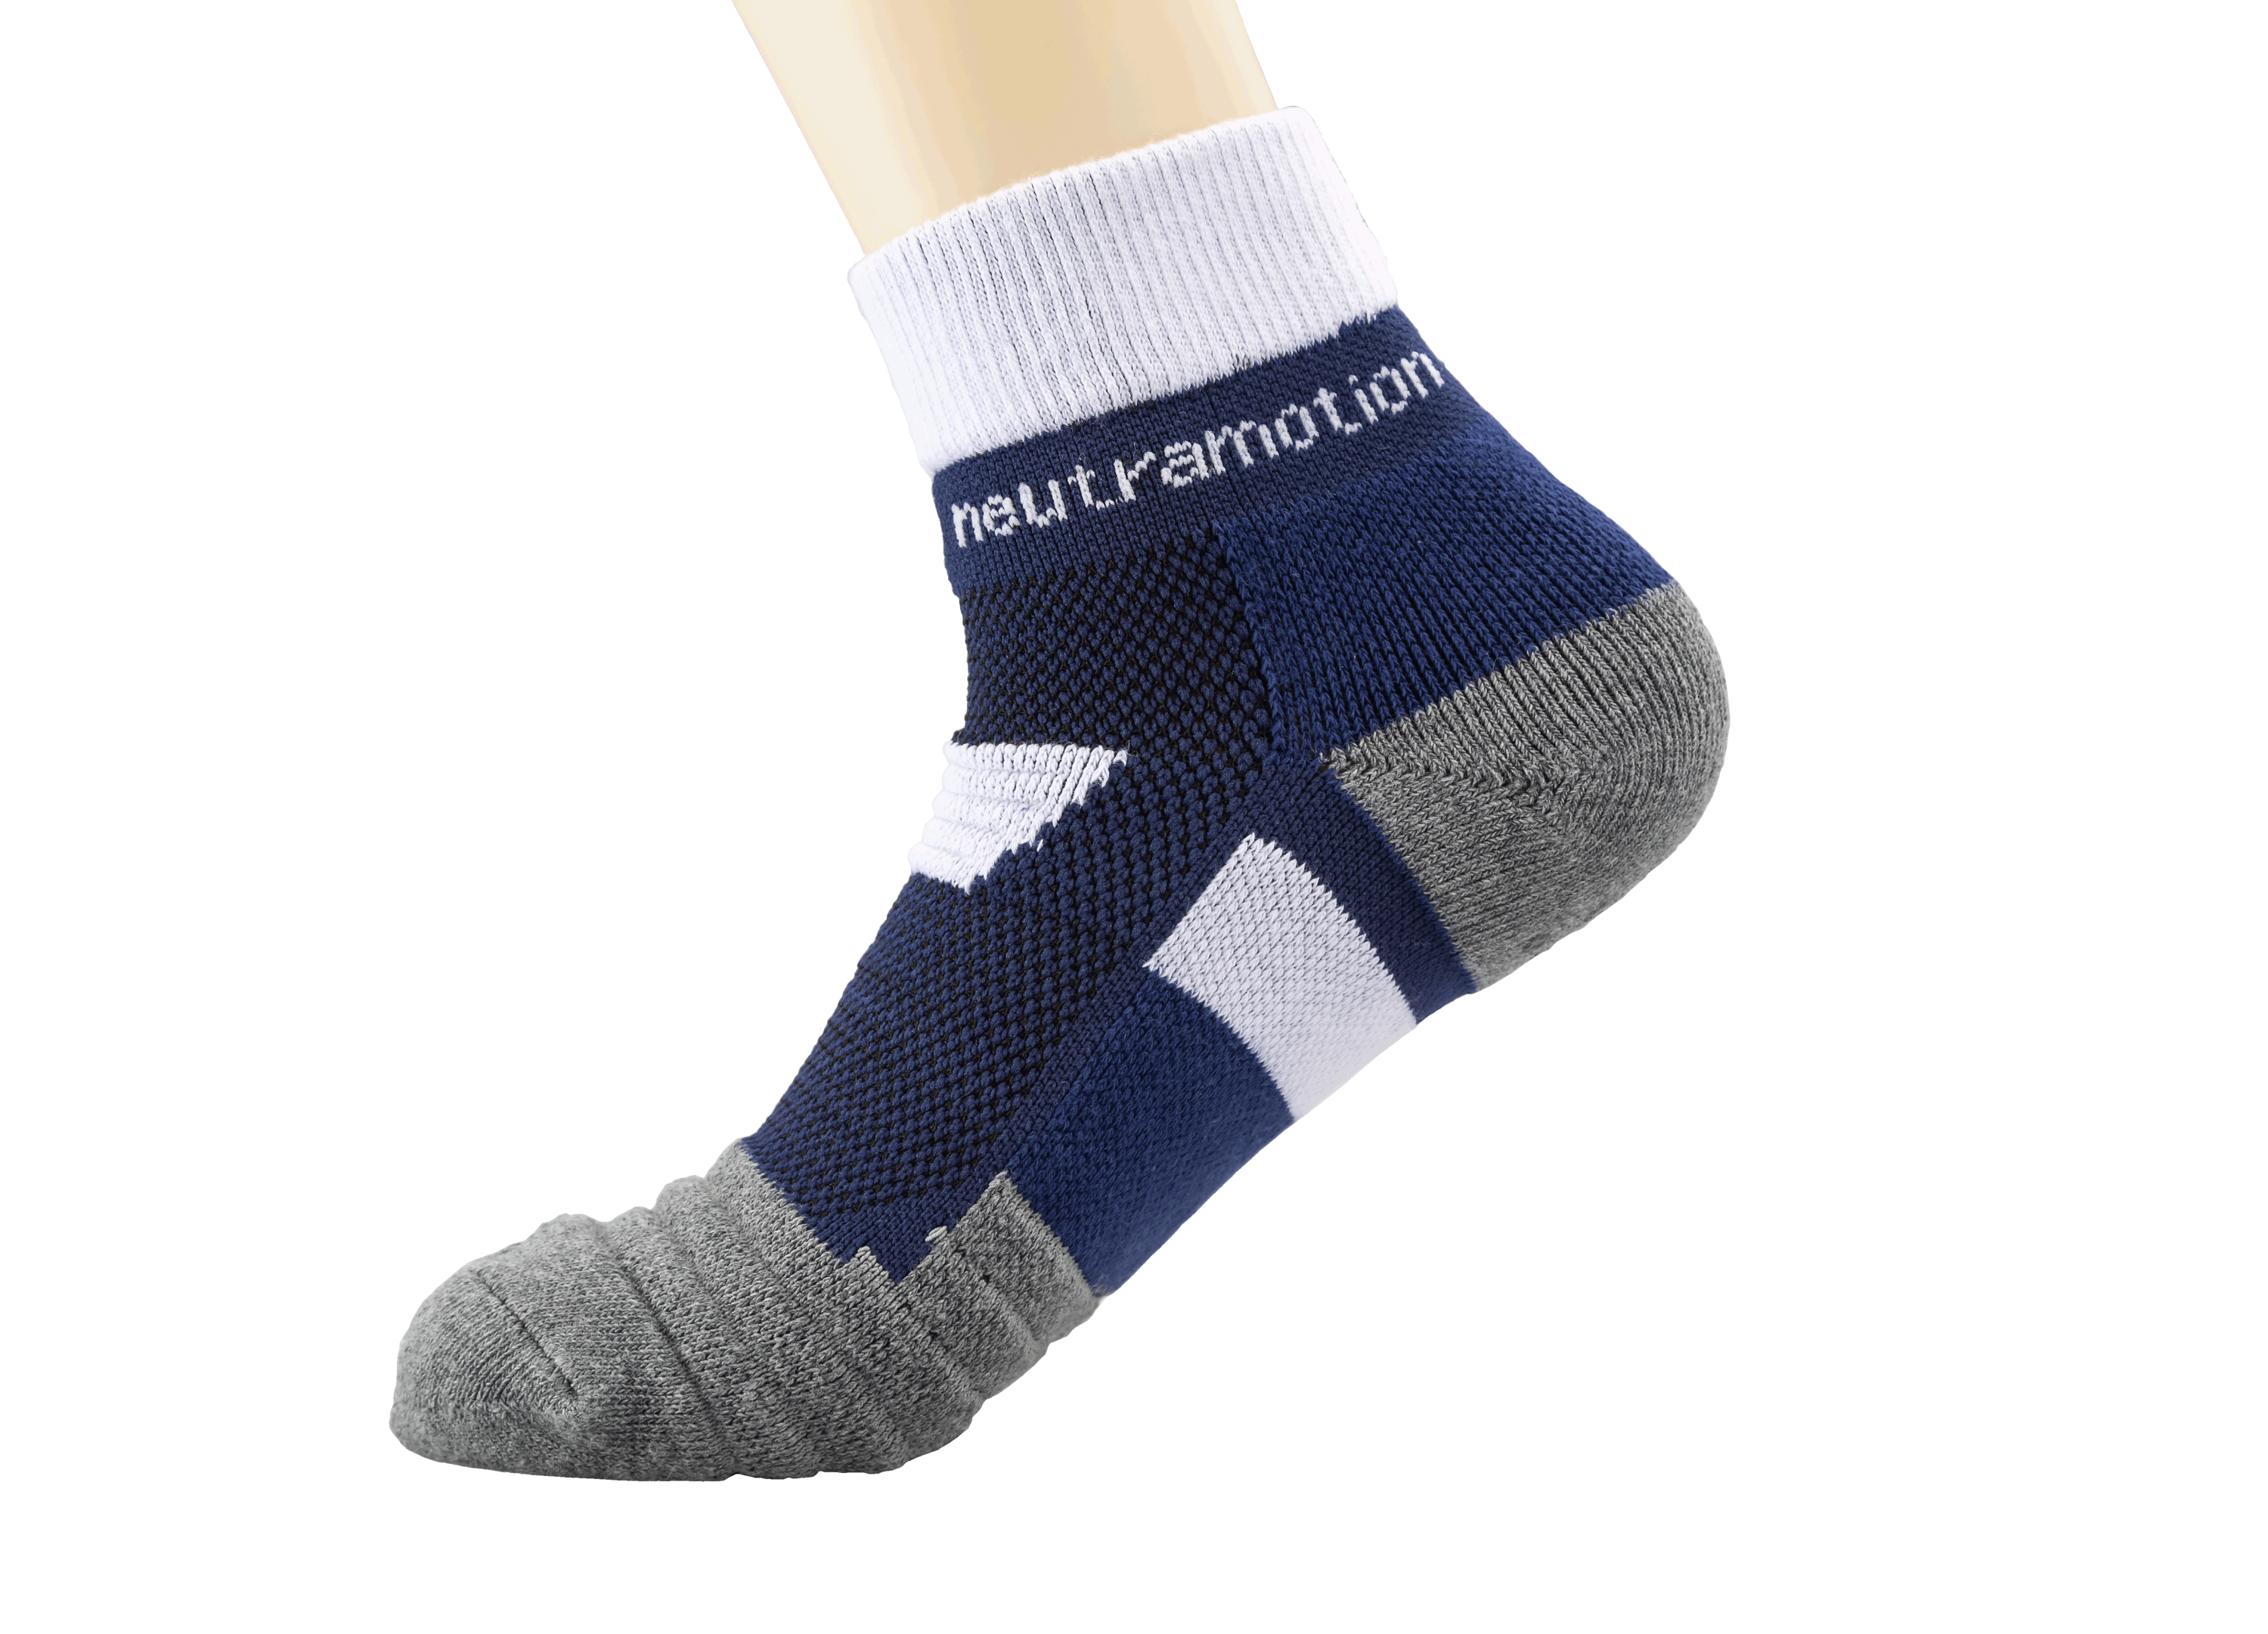 Now you can enjoy the comfort of high-performance arch support socks, scientifically developed using extensive R&D on the ‘Power of the Arch’.